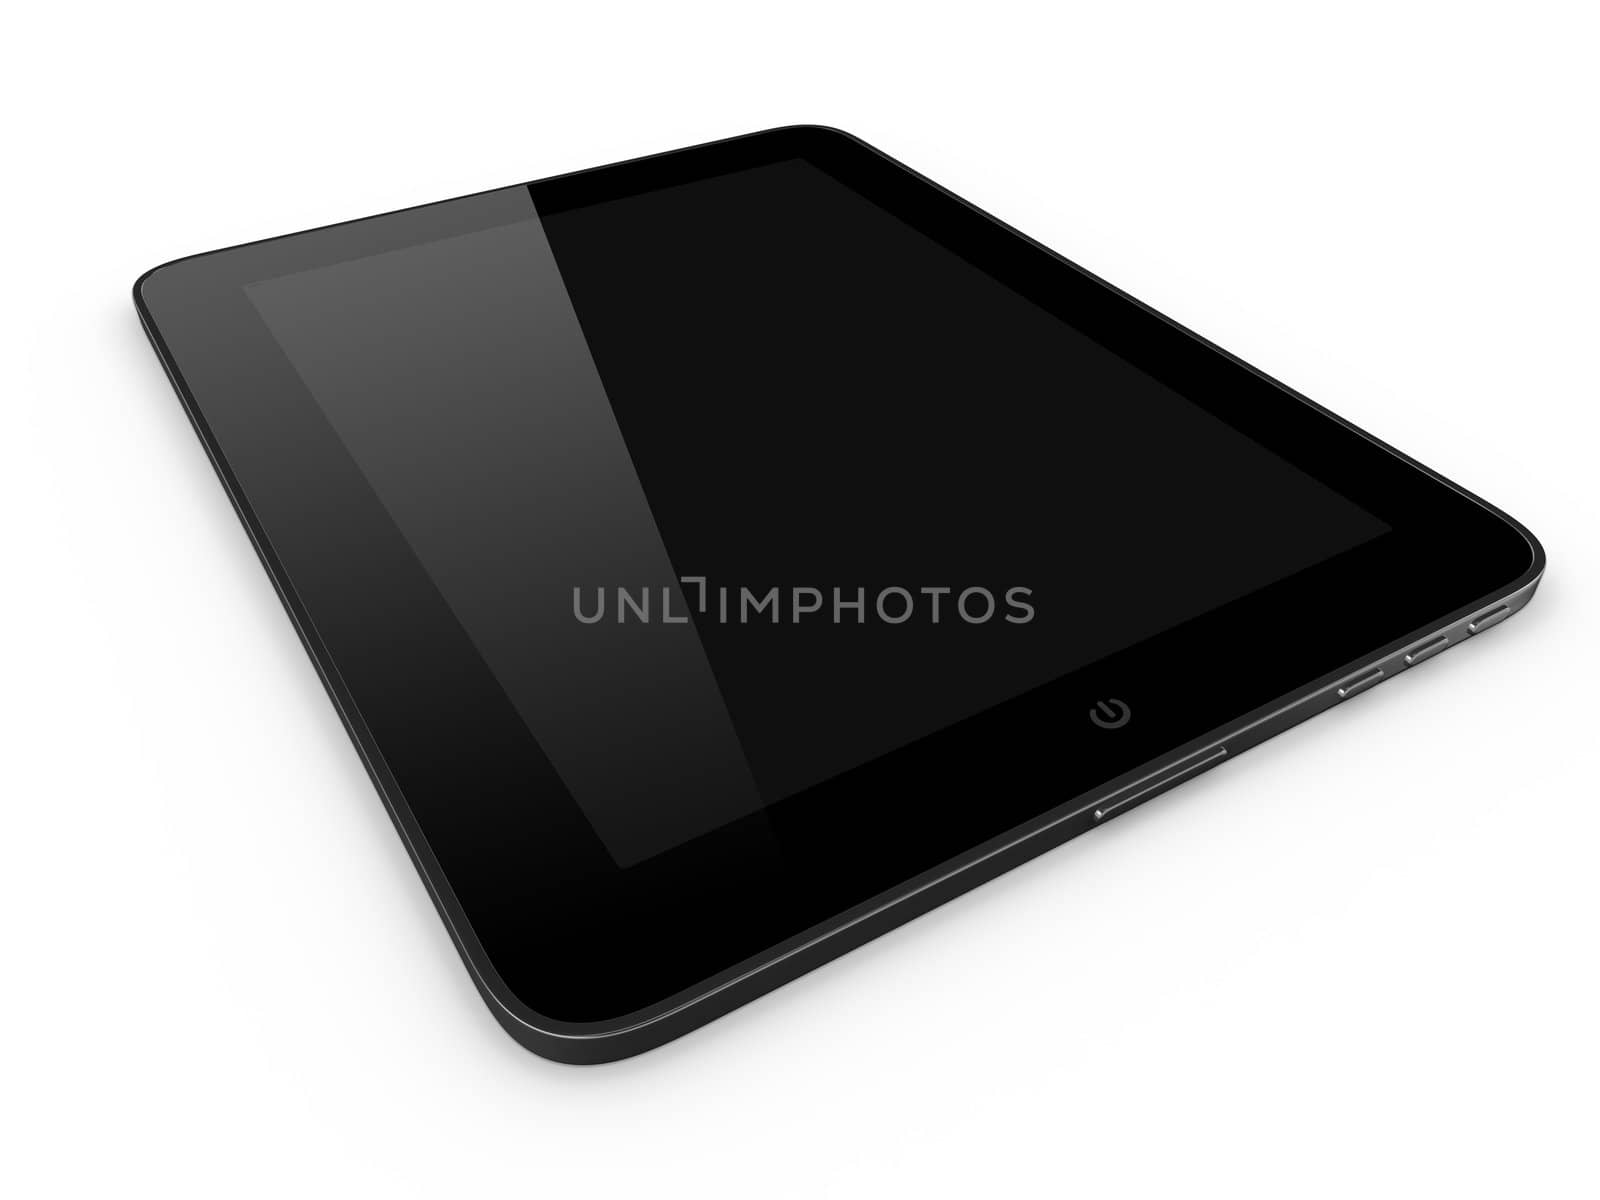 Realistic touch screen tablet computer isolated on white background. Modern touch pad device with blank screen and black frame.